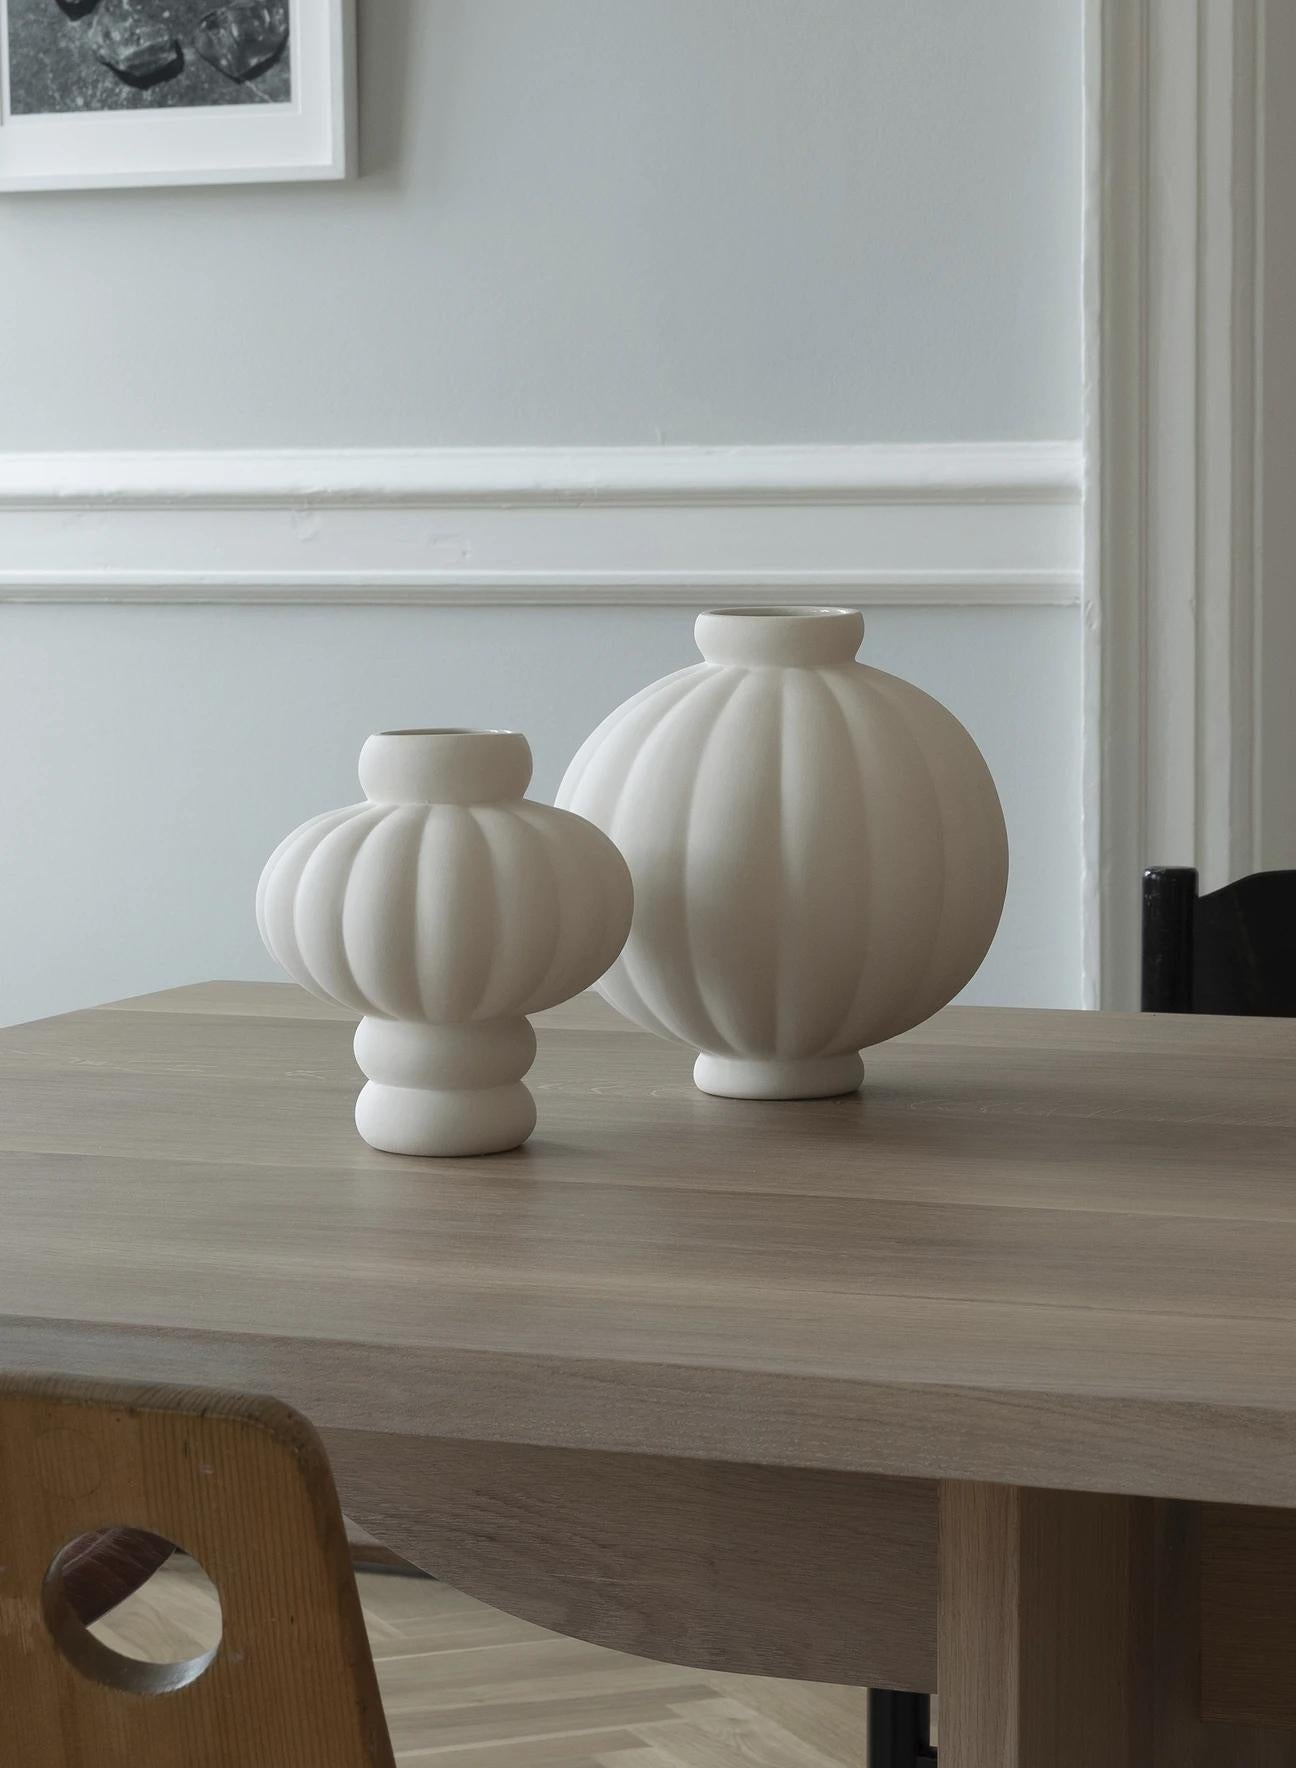 Balloon vase 02 grey
Handmade ceramic vase made by Danish artist Louise Roe.

Measure: Ø6.5-17.5 / H20 cm

About the artist:
Louise Roe is a Copenhagen based interior design brand, established in 2010.
Each object is personally sketched by